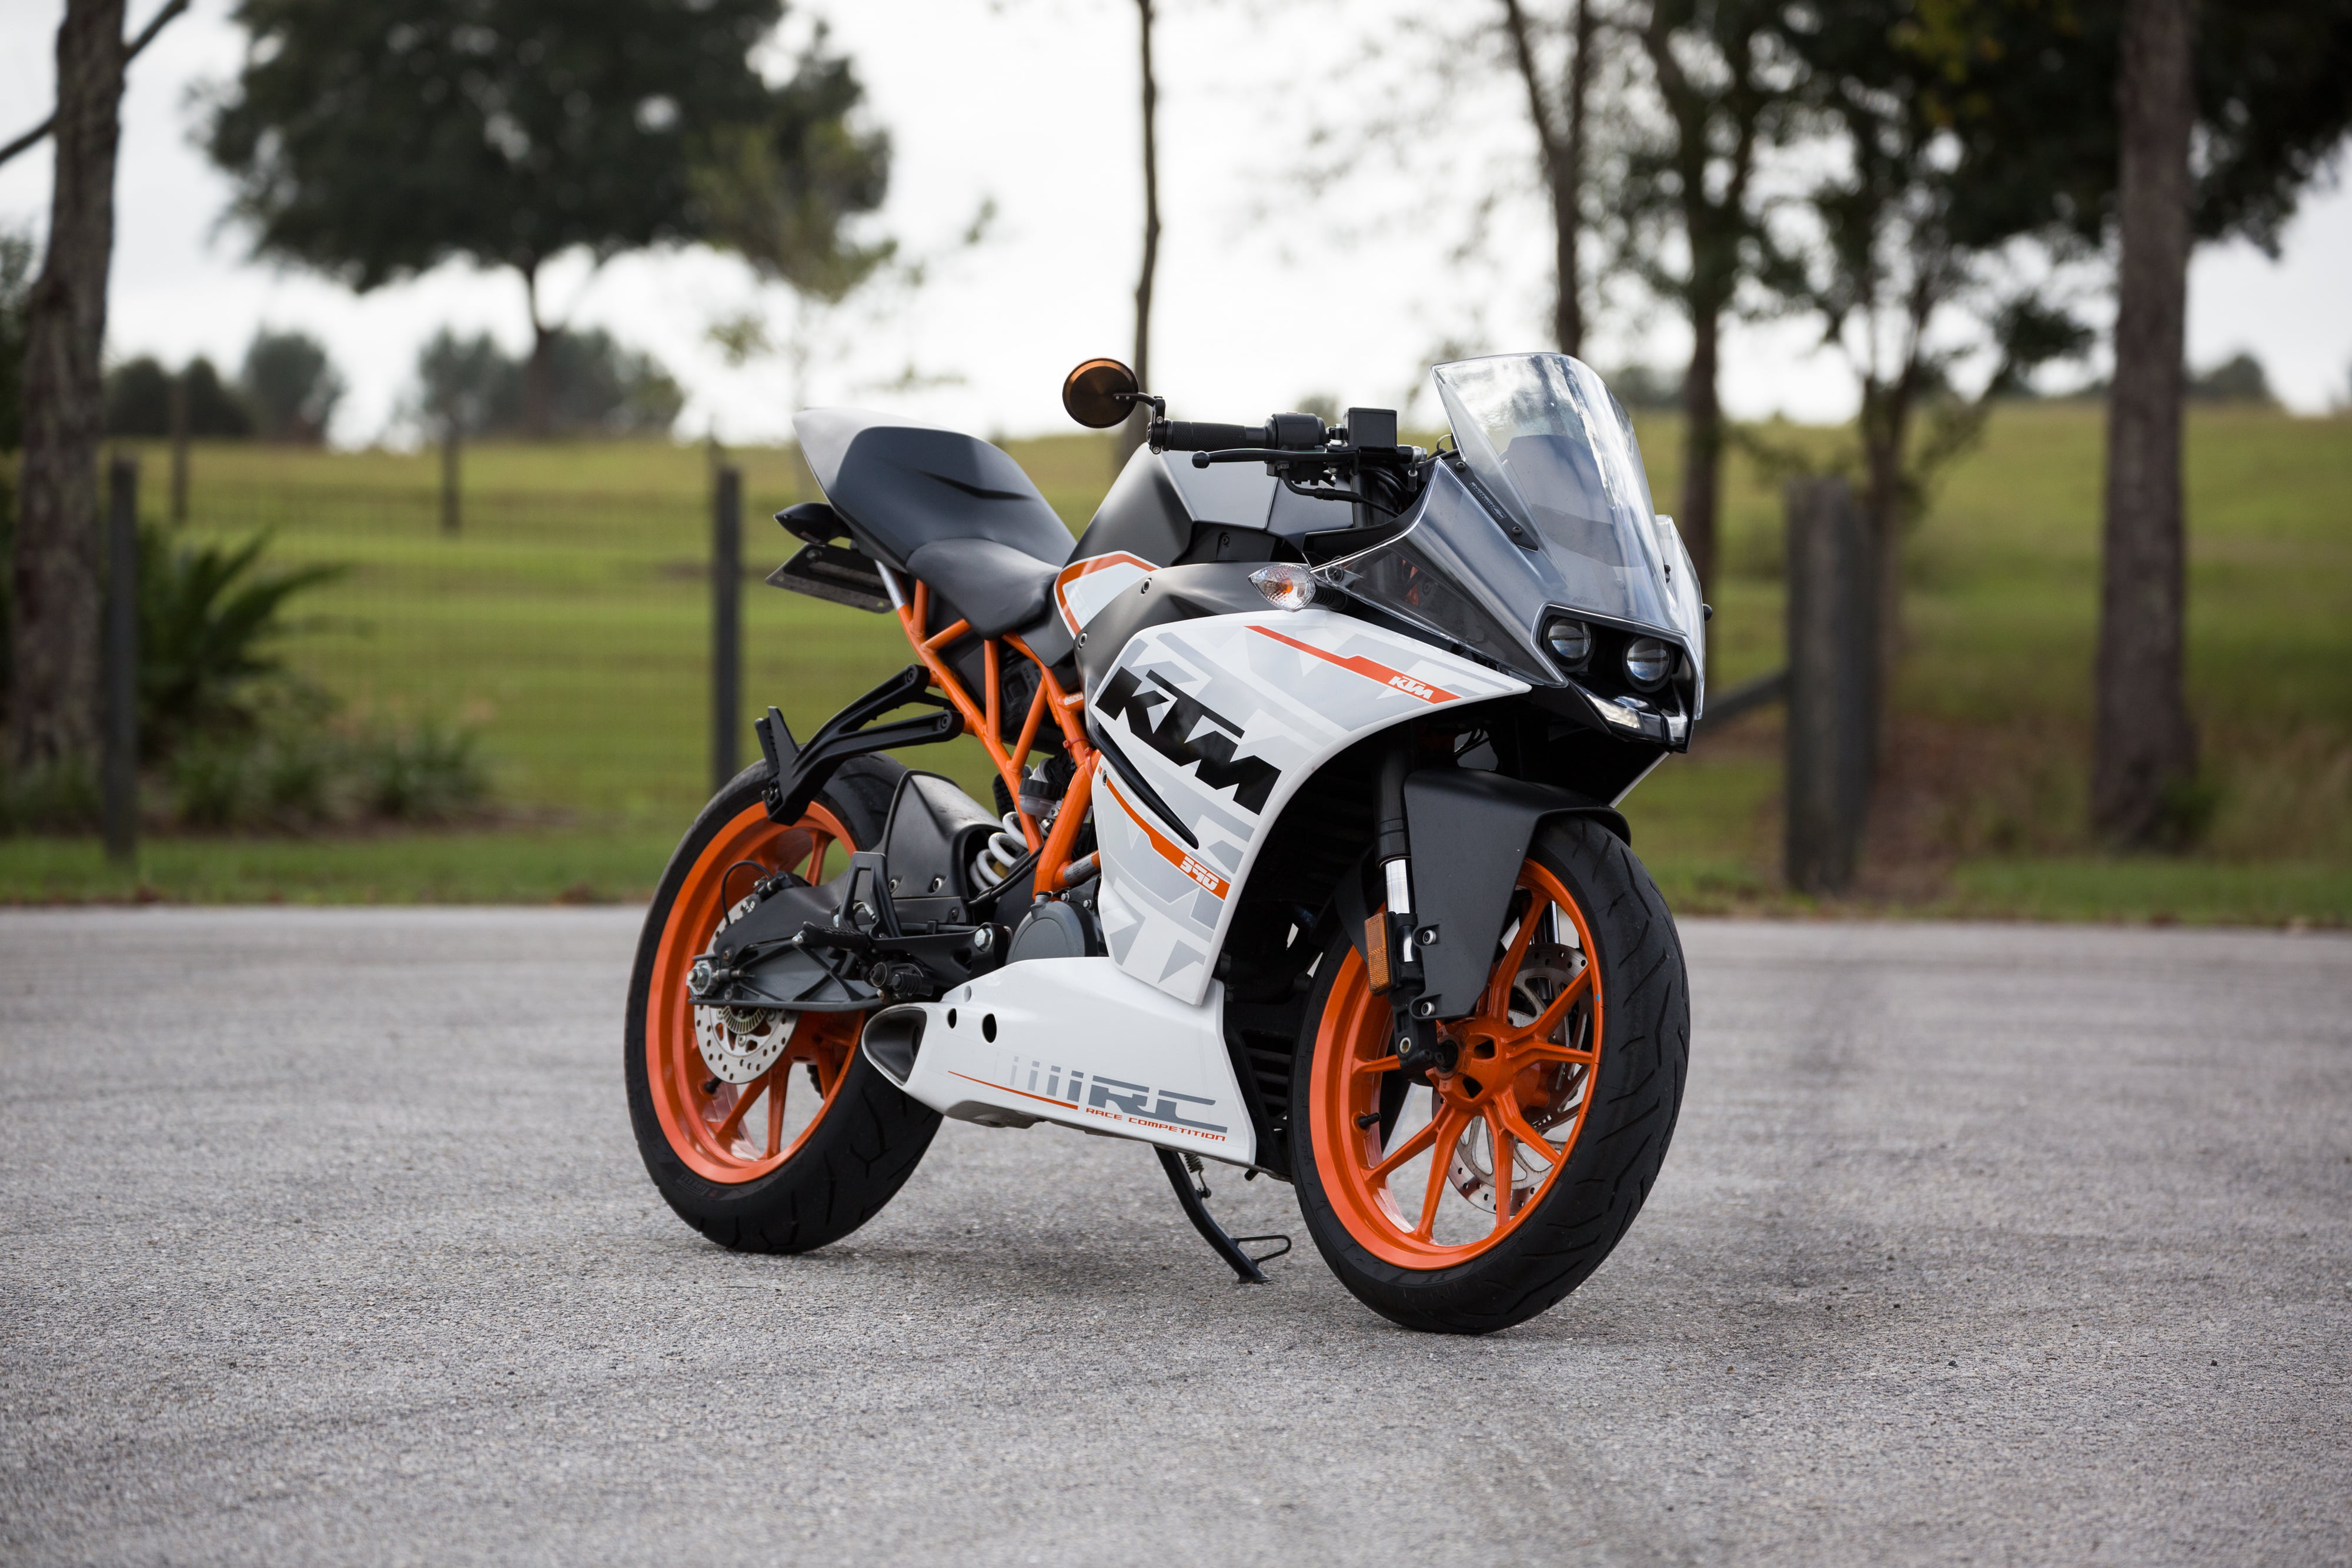 white and black KTM RC sportbike, motorcycle, side view, speed